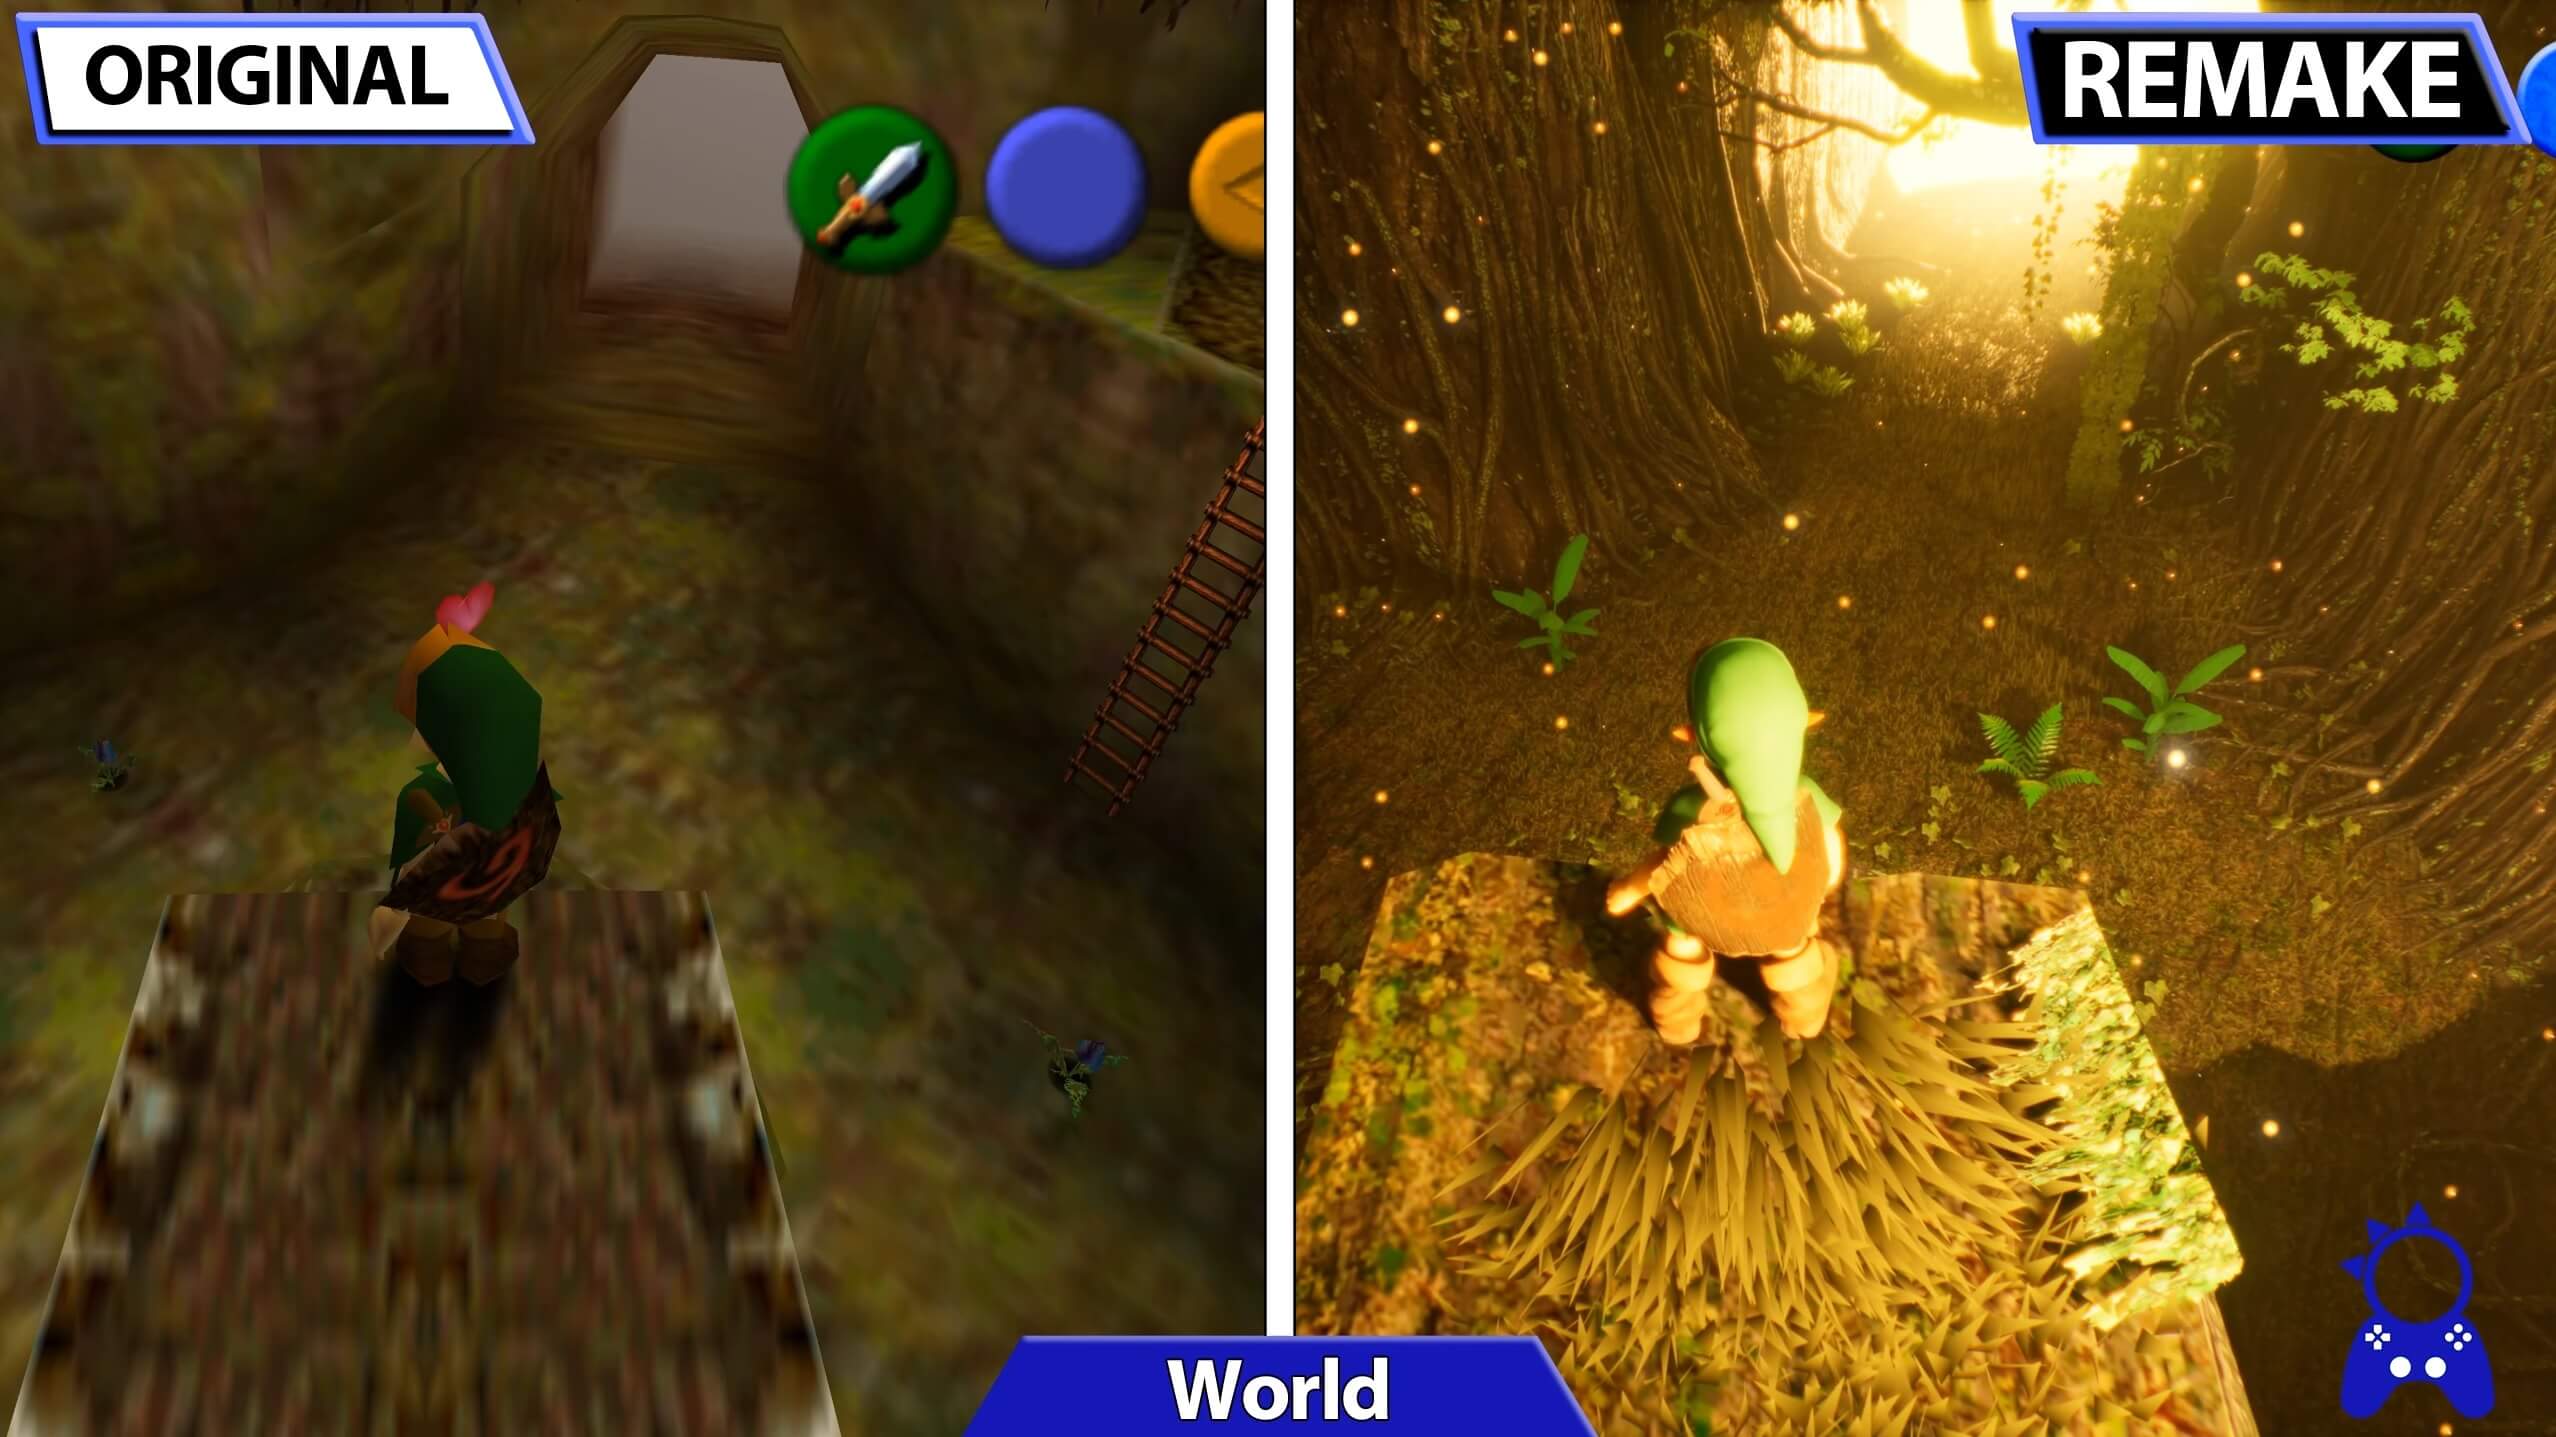 Legend of Zelda: Ocarina of Time has been remade in Unreal Engine 4 and  looks amazing